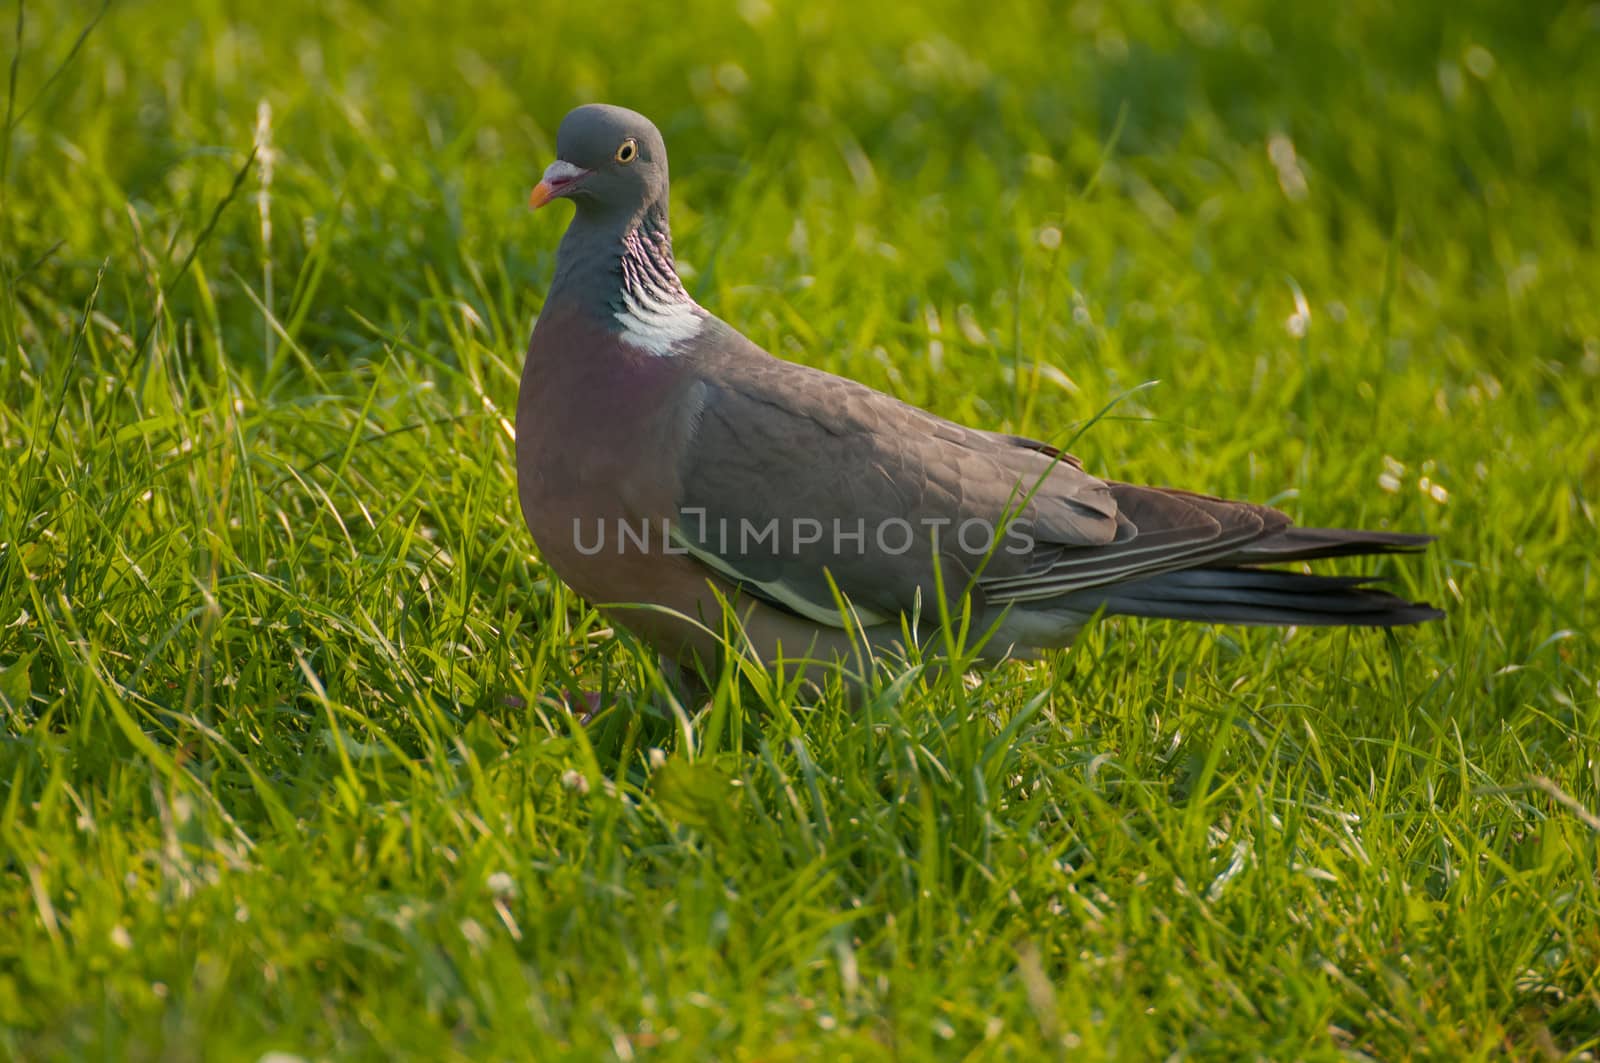 Pigeon by Gucio_55